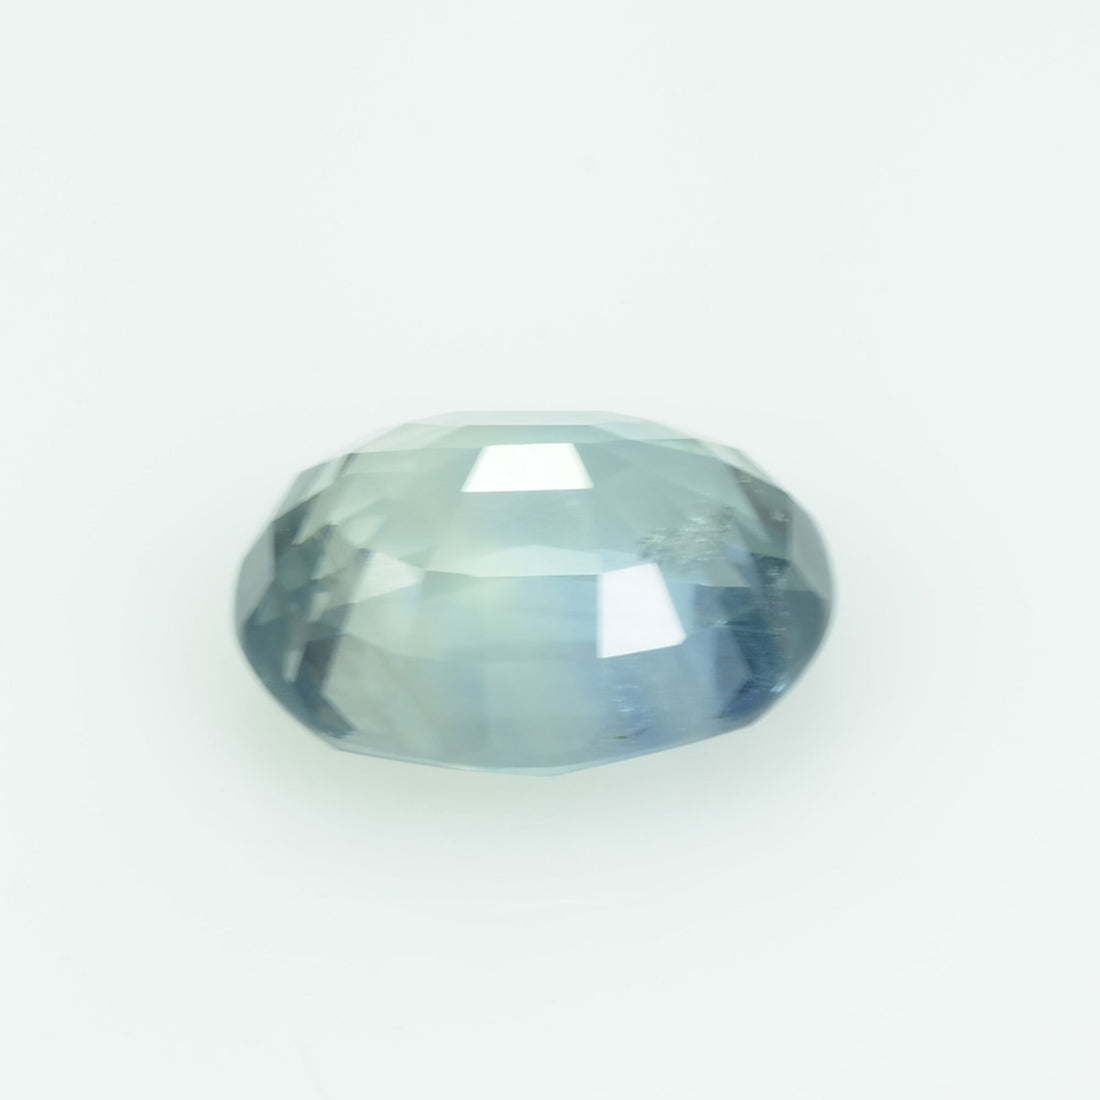 3.91 Cts Natural Blue yellow Sapphire Loose Gemstone Oval Cut